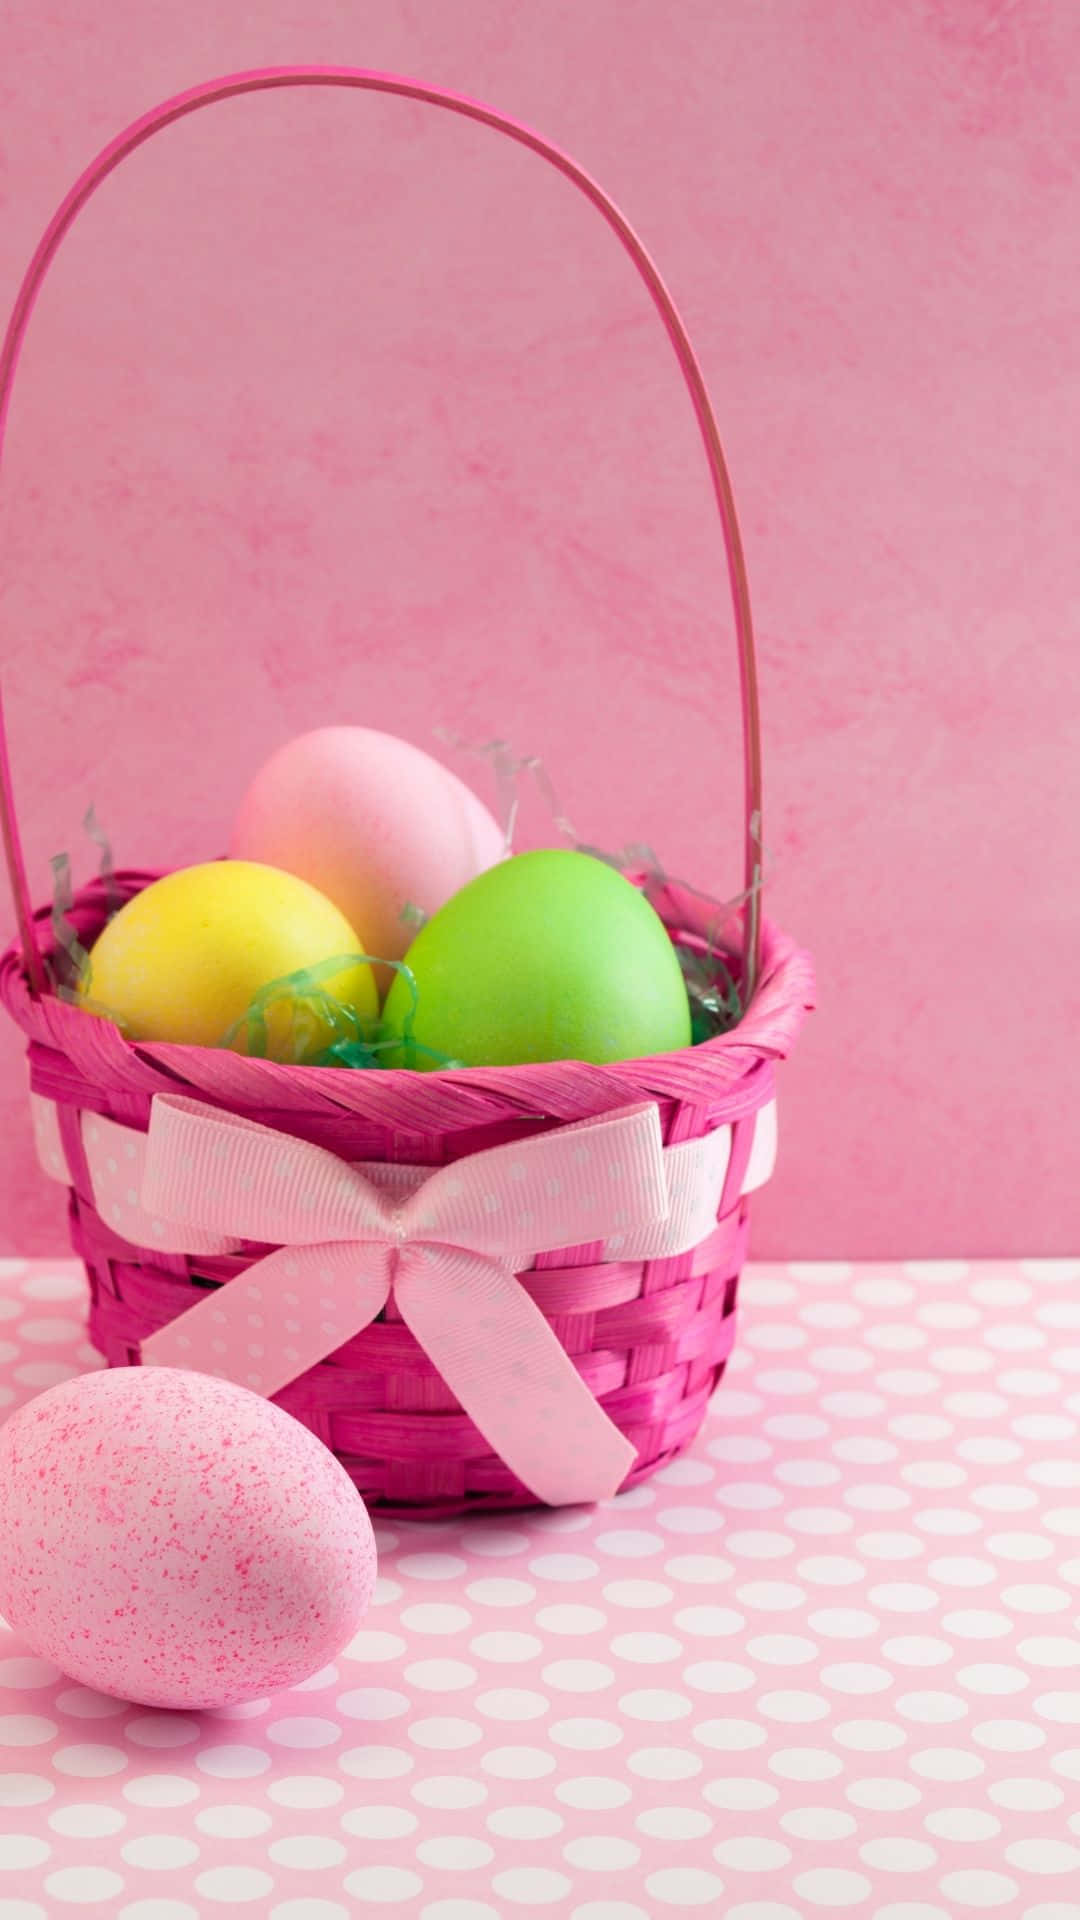 A festive Easter basket with brightly colored eggs and candy Wallpaper